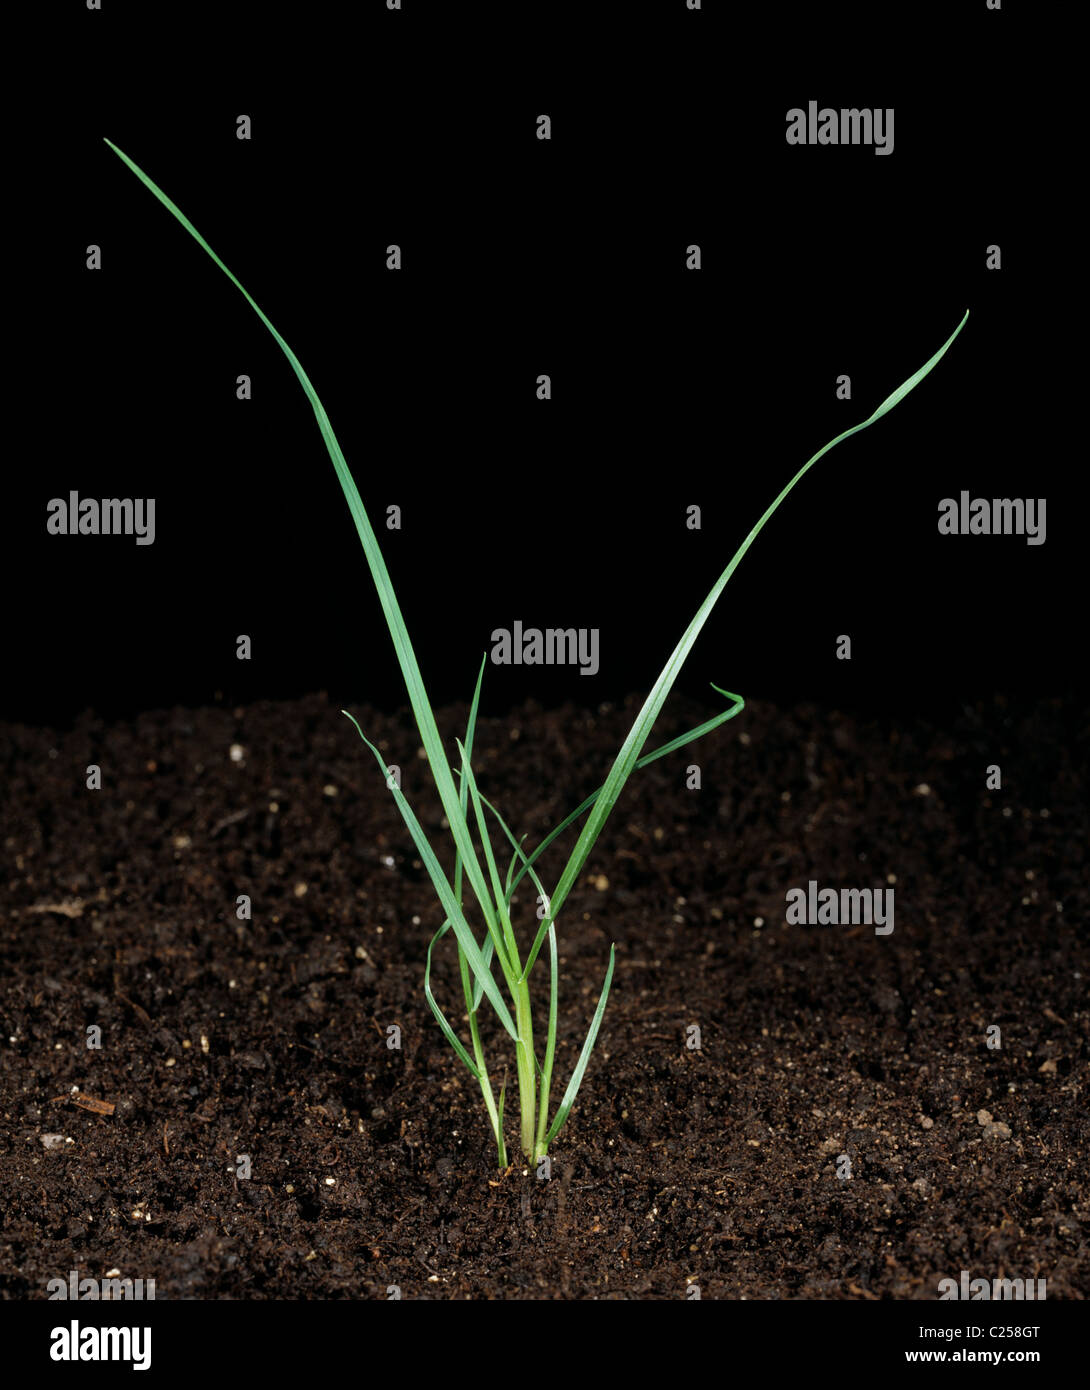 Rough-stalked meadow grass (Poa trivialis) young tillering plant Stock Photo